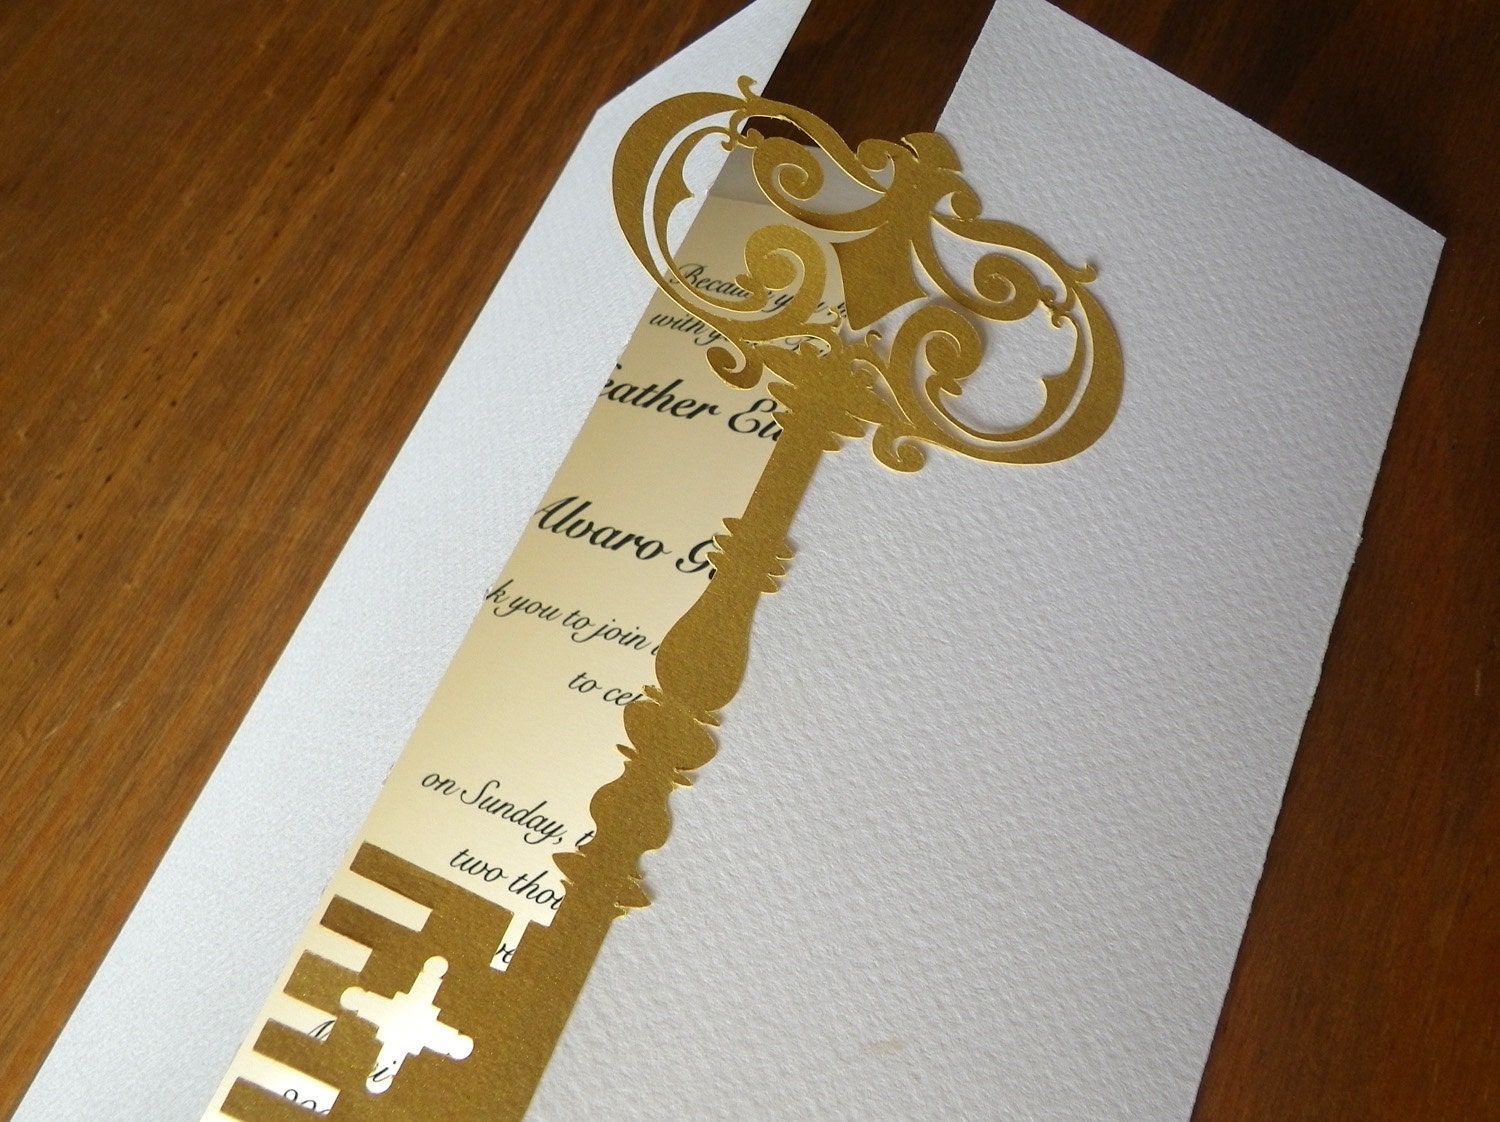 This is a very elegant wedding invitation set with an old vintage key 